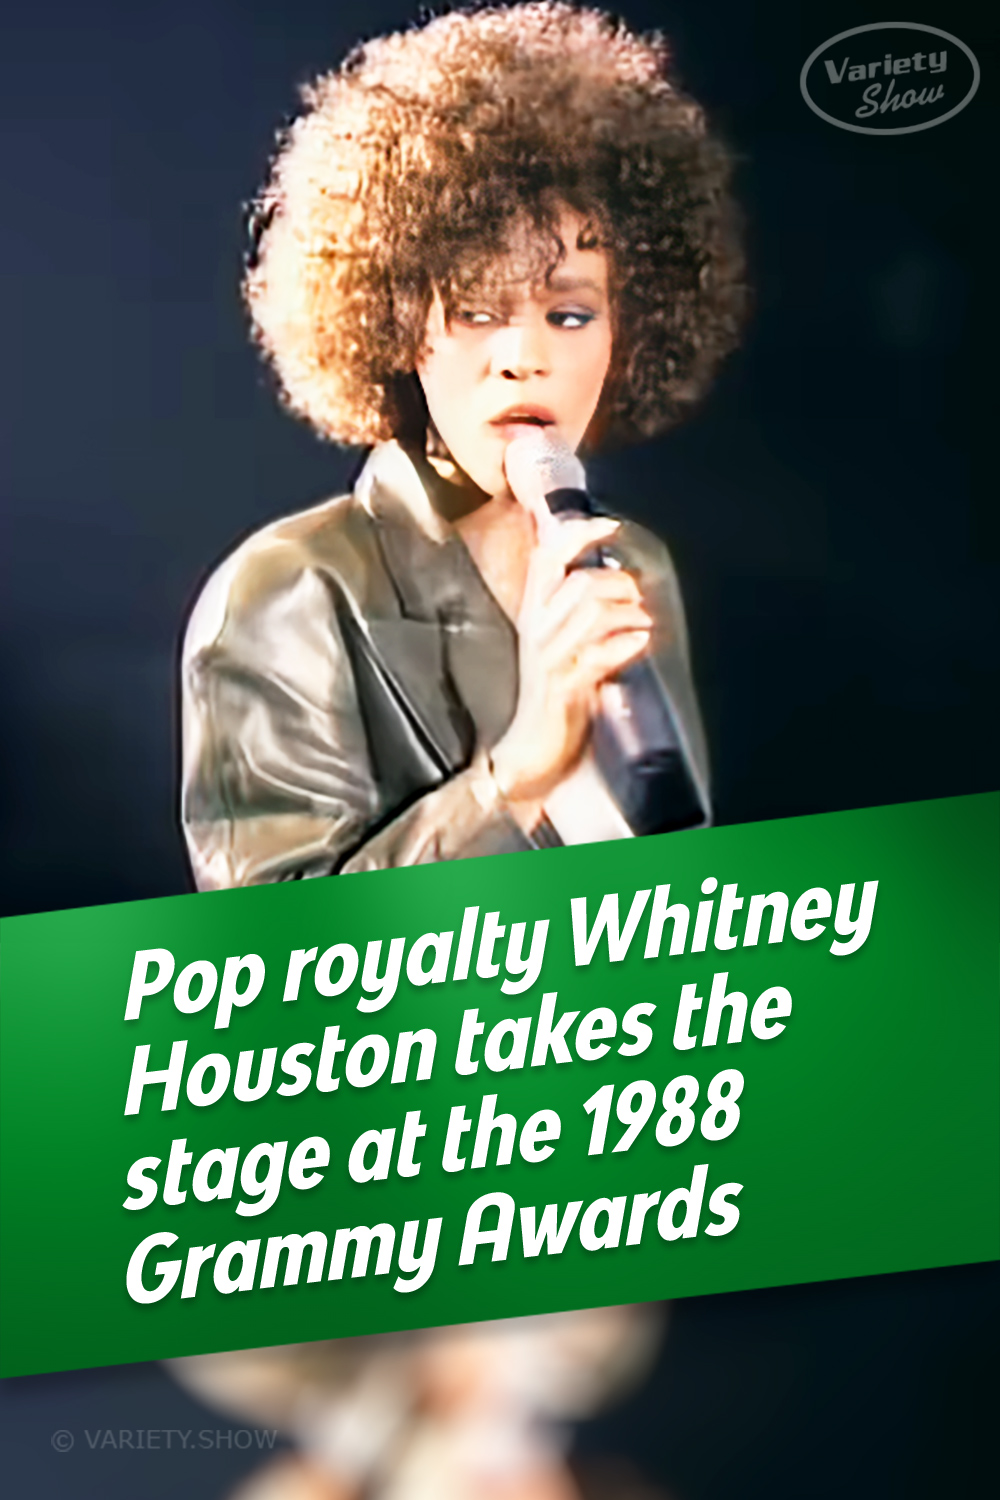 Pop royalty Whitney Houston takes the stage at the 1988 Grammy Awards